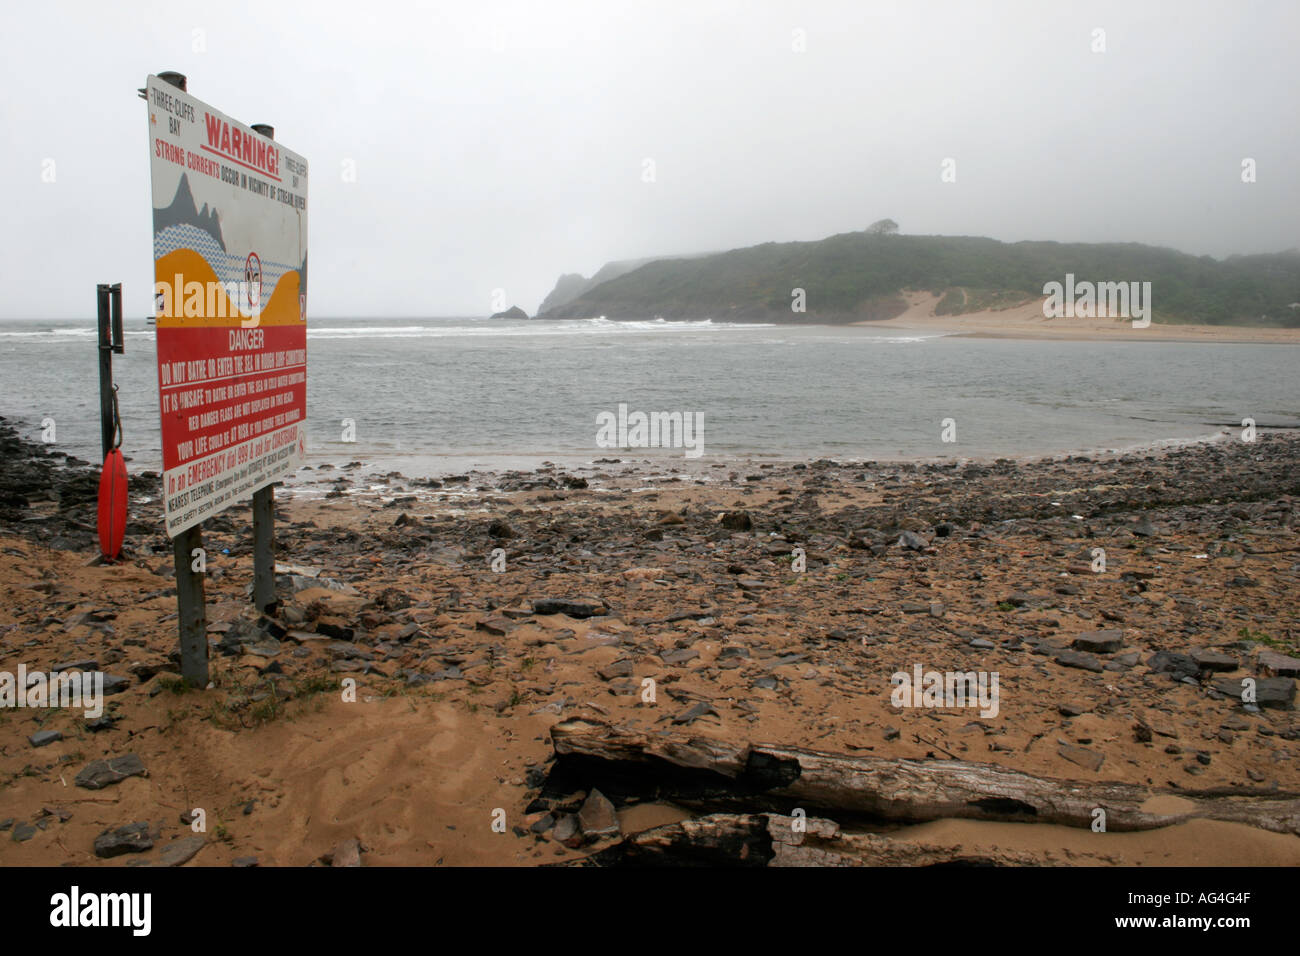 Sign Warning of Dangerous Currents - HIGH TIDE AT THREE CLIFFS BAY, GOWER PENINSULA, SOUTH WALES, U.K. Stock Photo